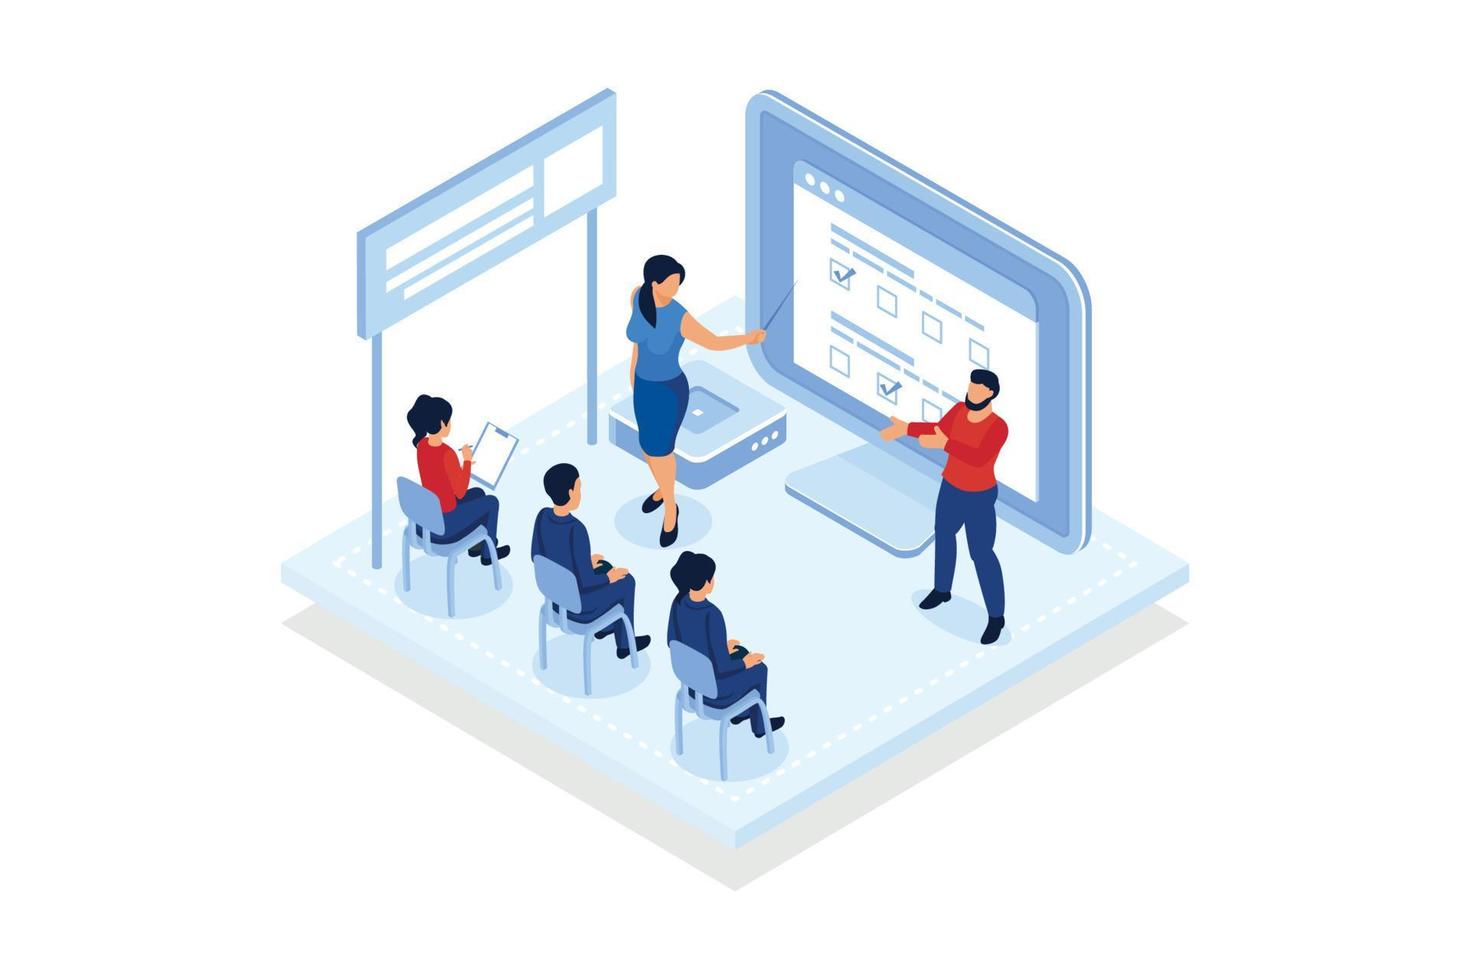 Executive manager planning and monitoring presentation. Project initiation, project initiation documentation, determine your goals concept. isometric vector modern illustration